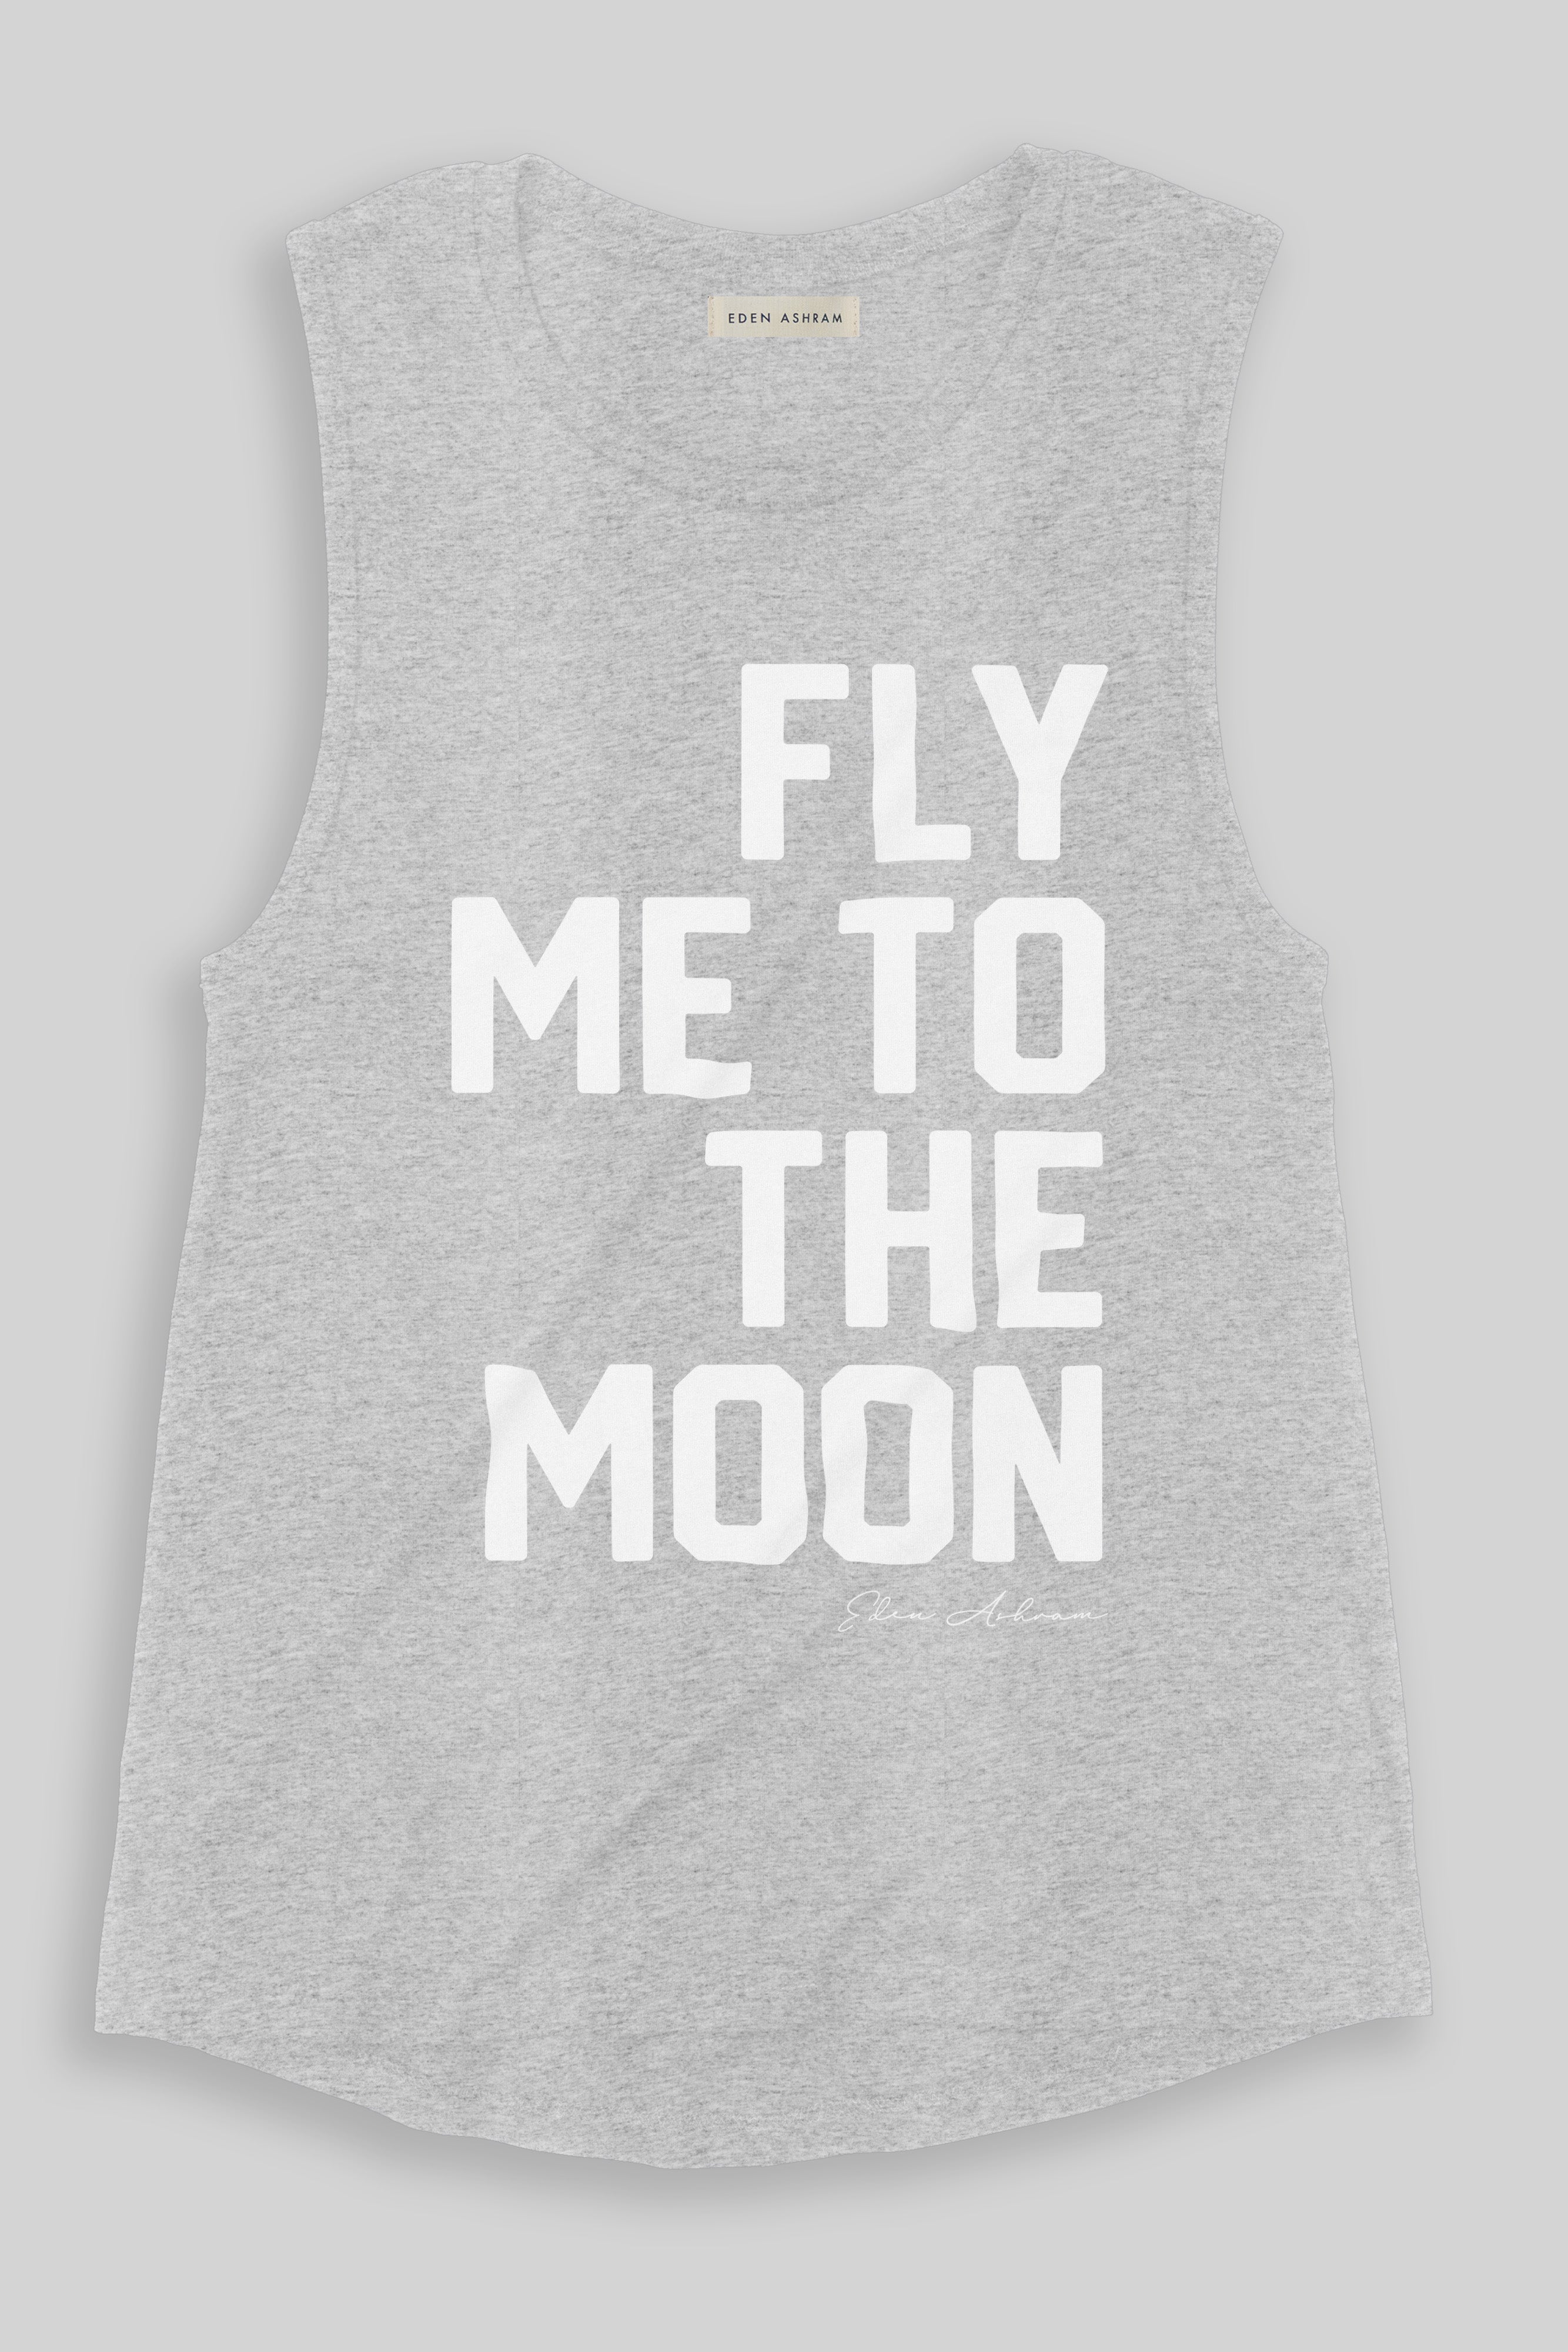 EDEN ASHRAM Fly Me To The Moon Jersey Muscle Tank Heather Grey